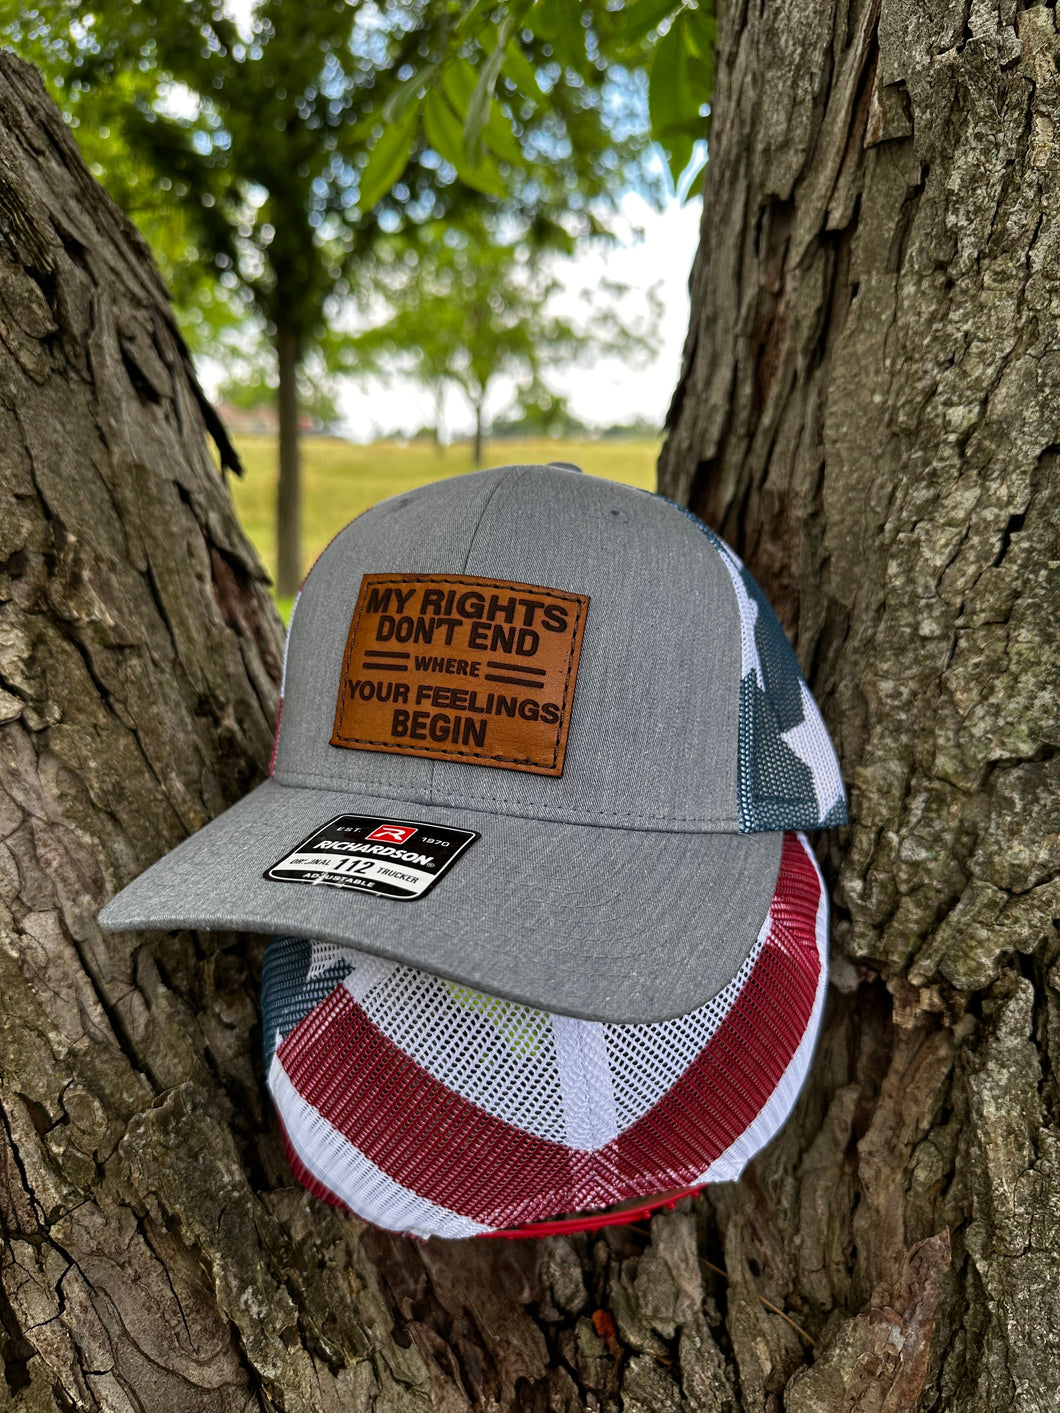 My Rights Don't End Where Your Feelings Begin Trucker Hats